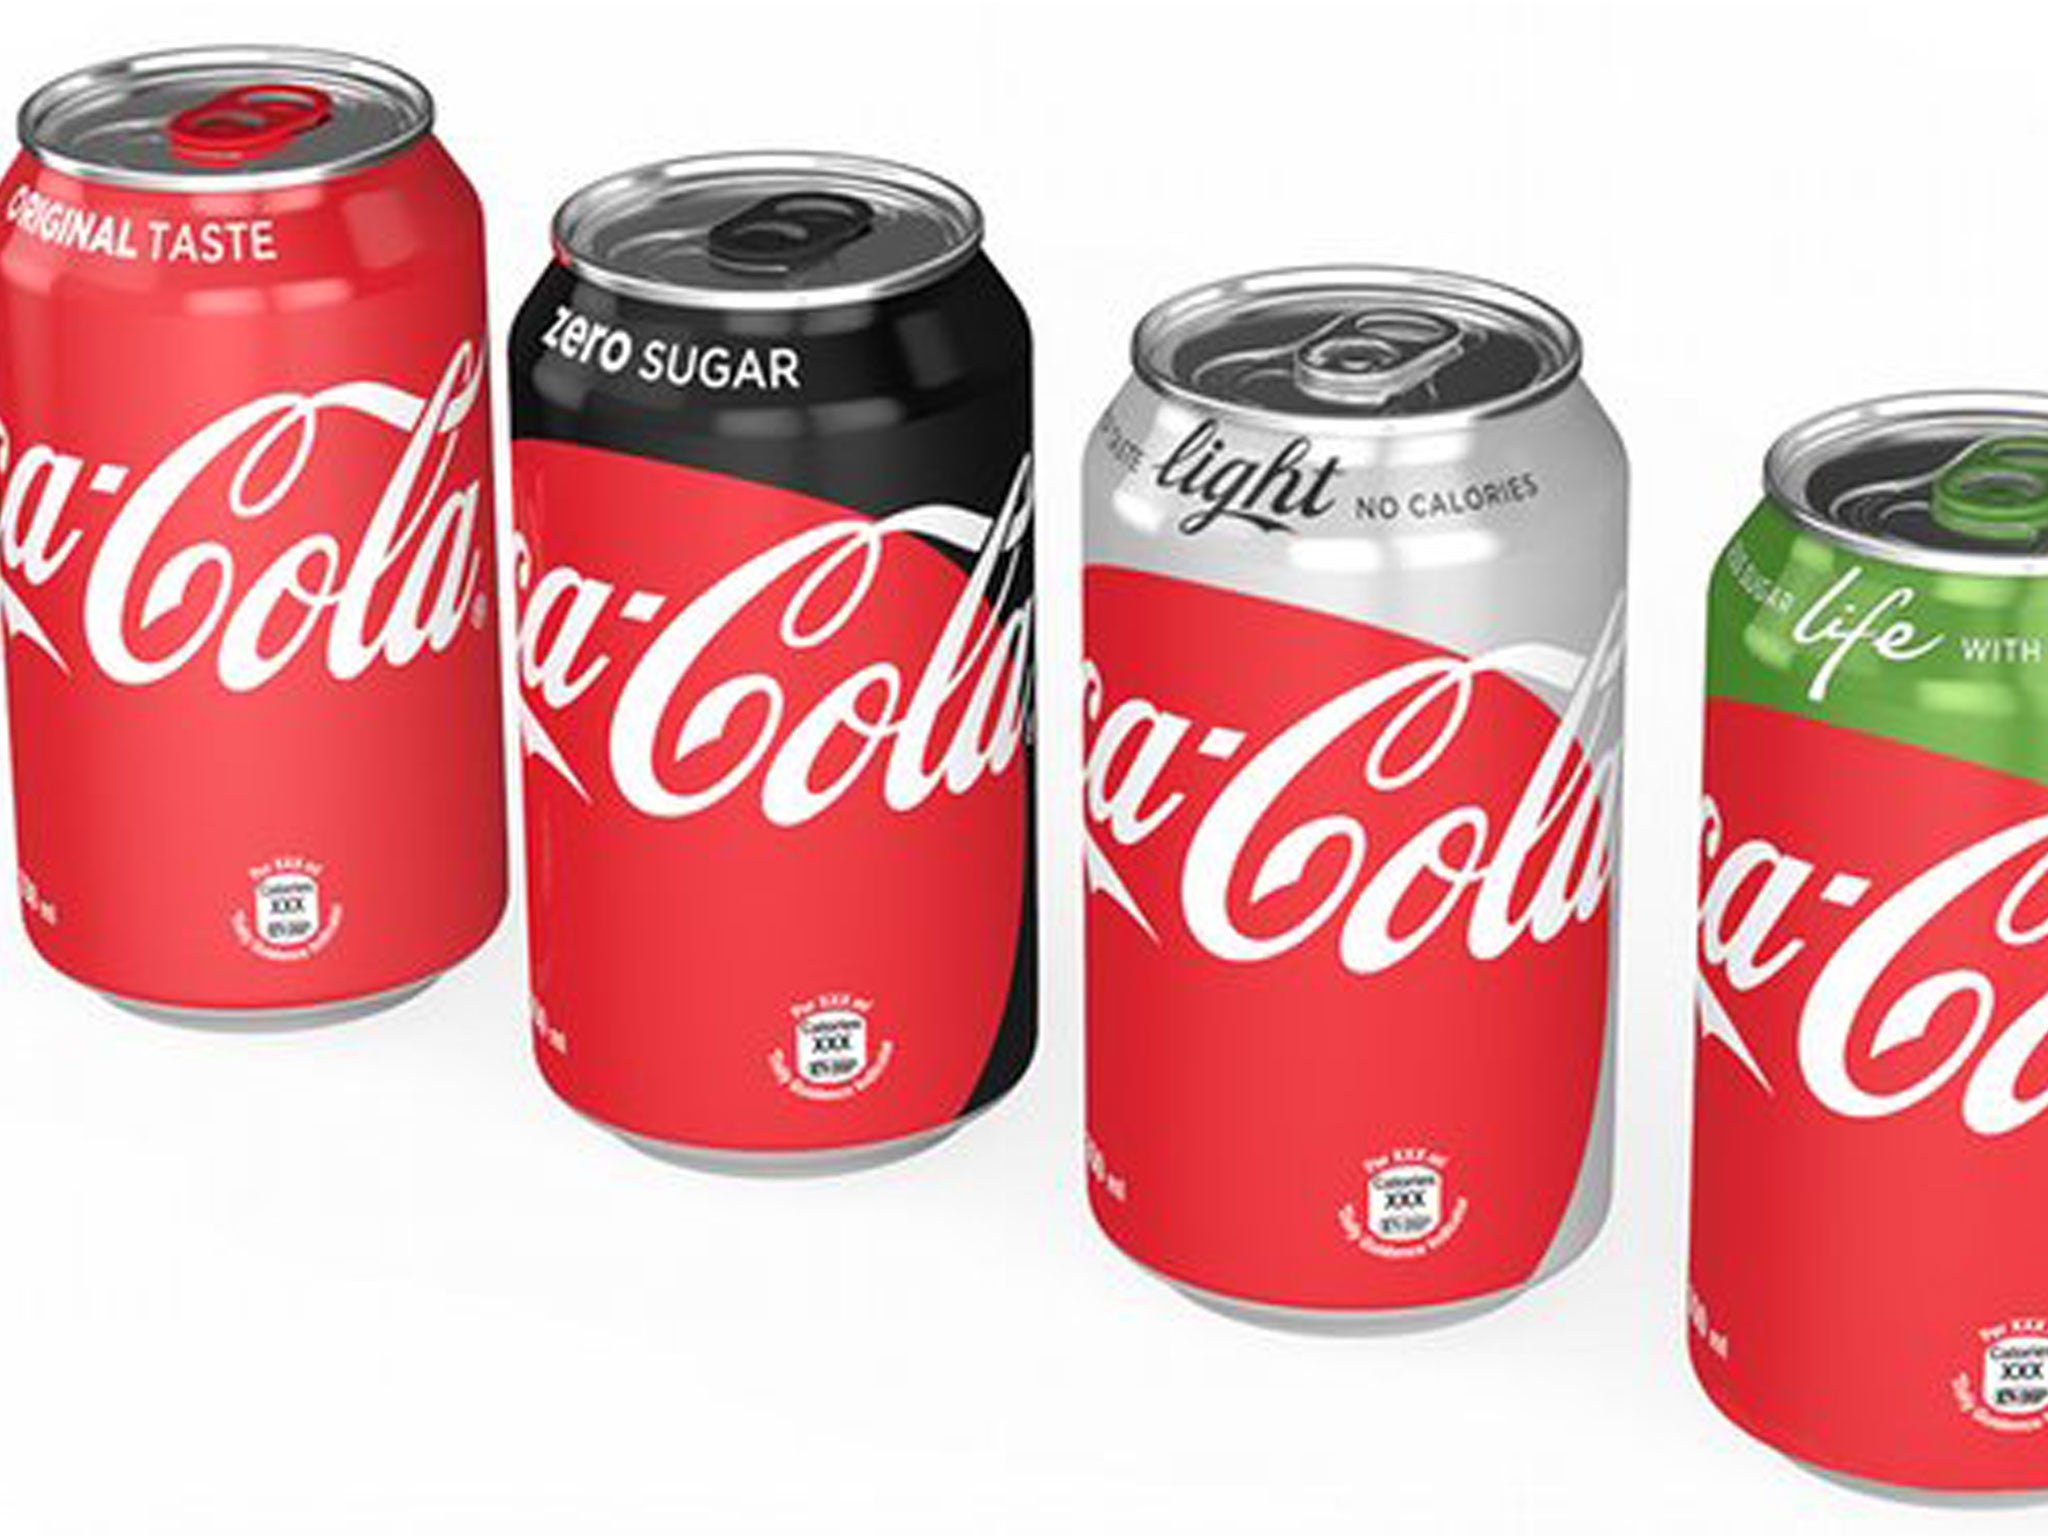 Coca-Cola has announced the launch of new graphics that use one visual identity system featuring Coca-Cola Red as a unifying color across the Trademark.